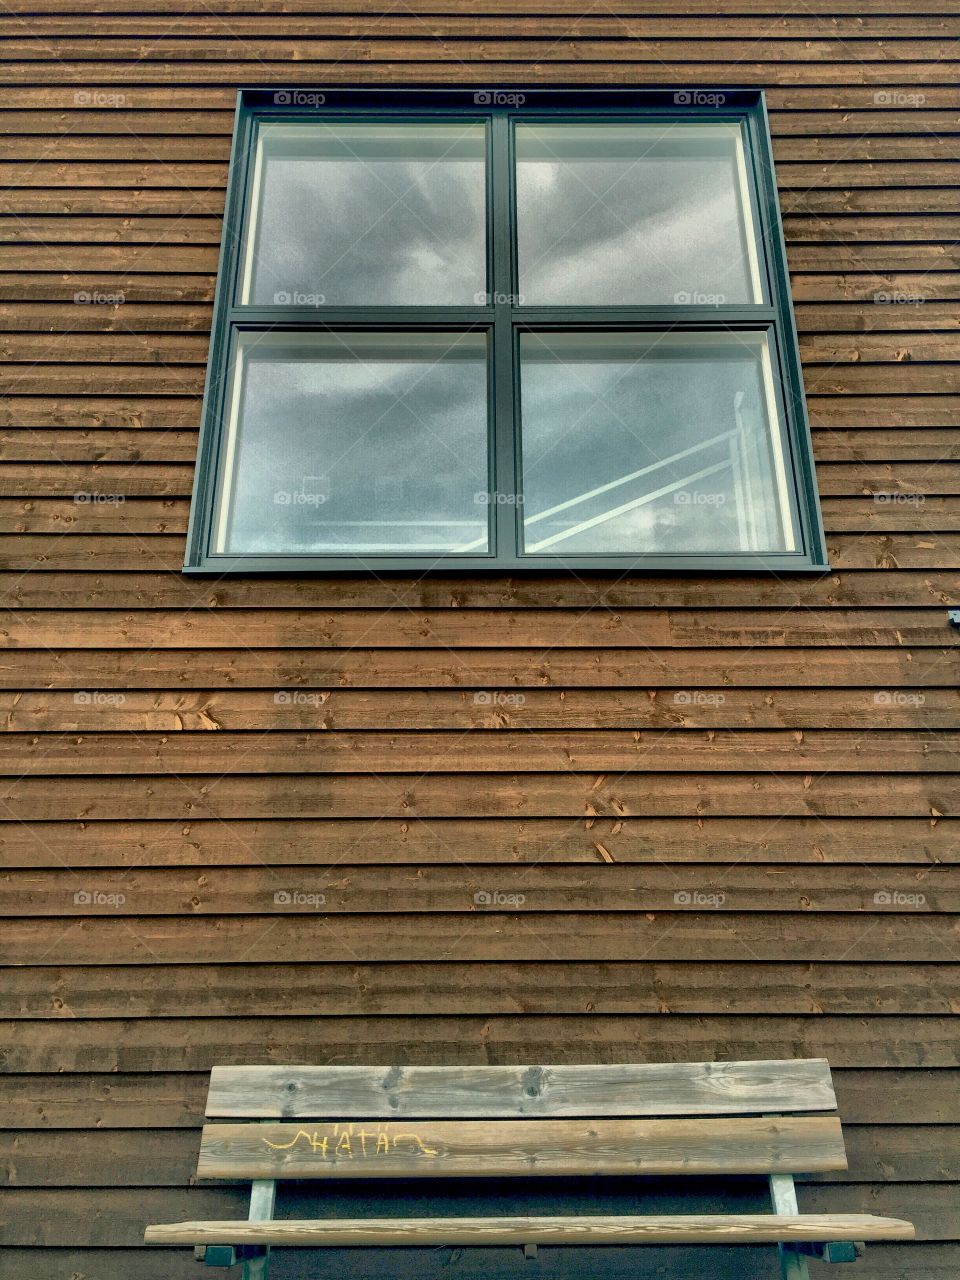 Reflecting the sky. Square window in wooden wall with sky reflection